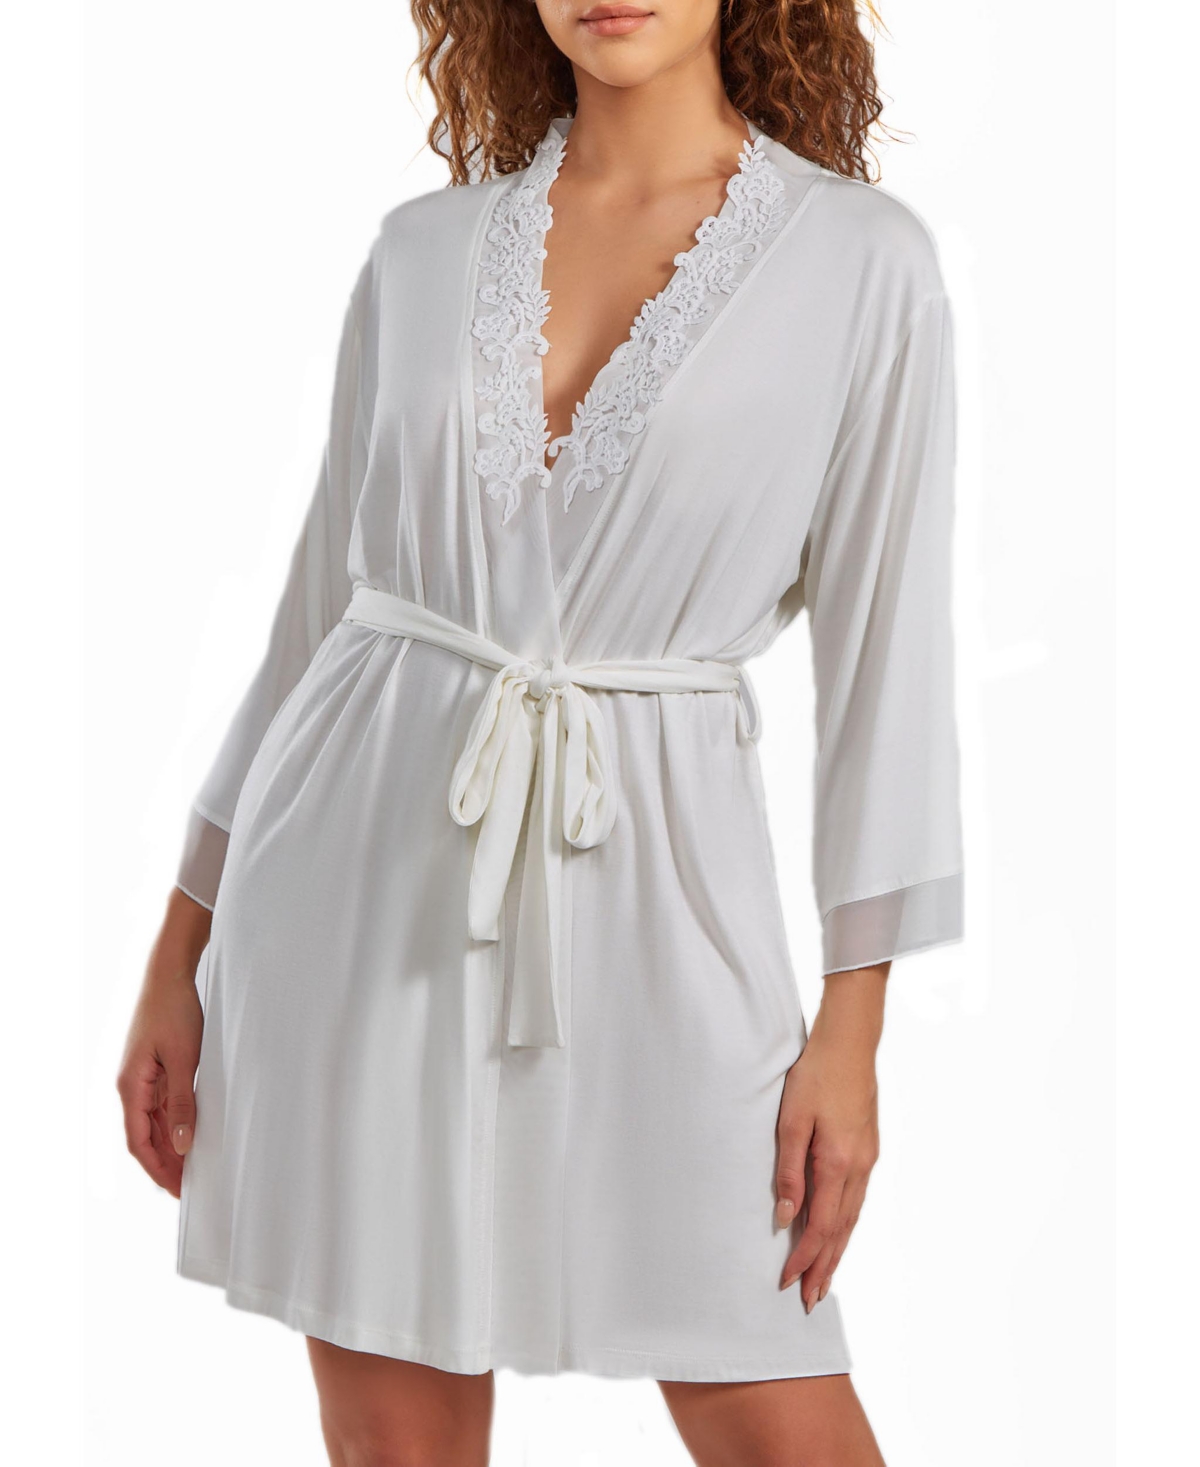 Icollection Women's Cyrus Lace Robe With Mesh Trimmed Sleeves And Self Tie With Sash In White